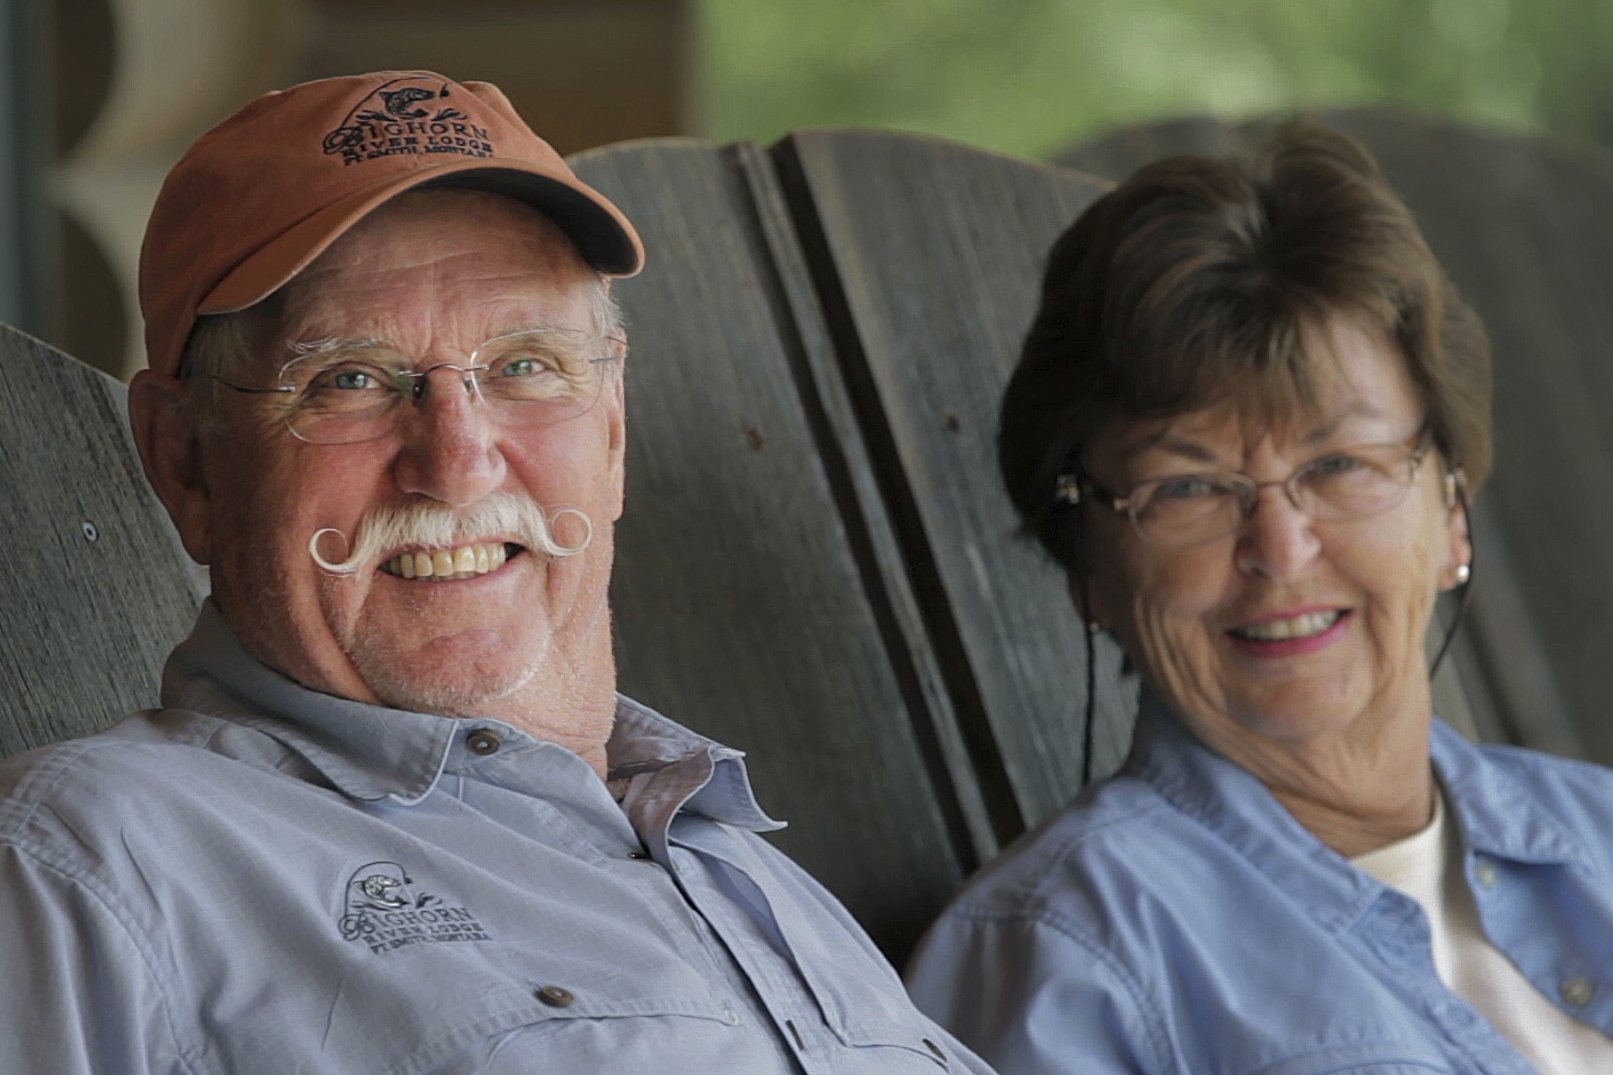 Bighorn River Lodge will welcome you with its hosts, the Rolph Family.